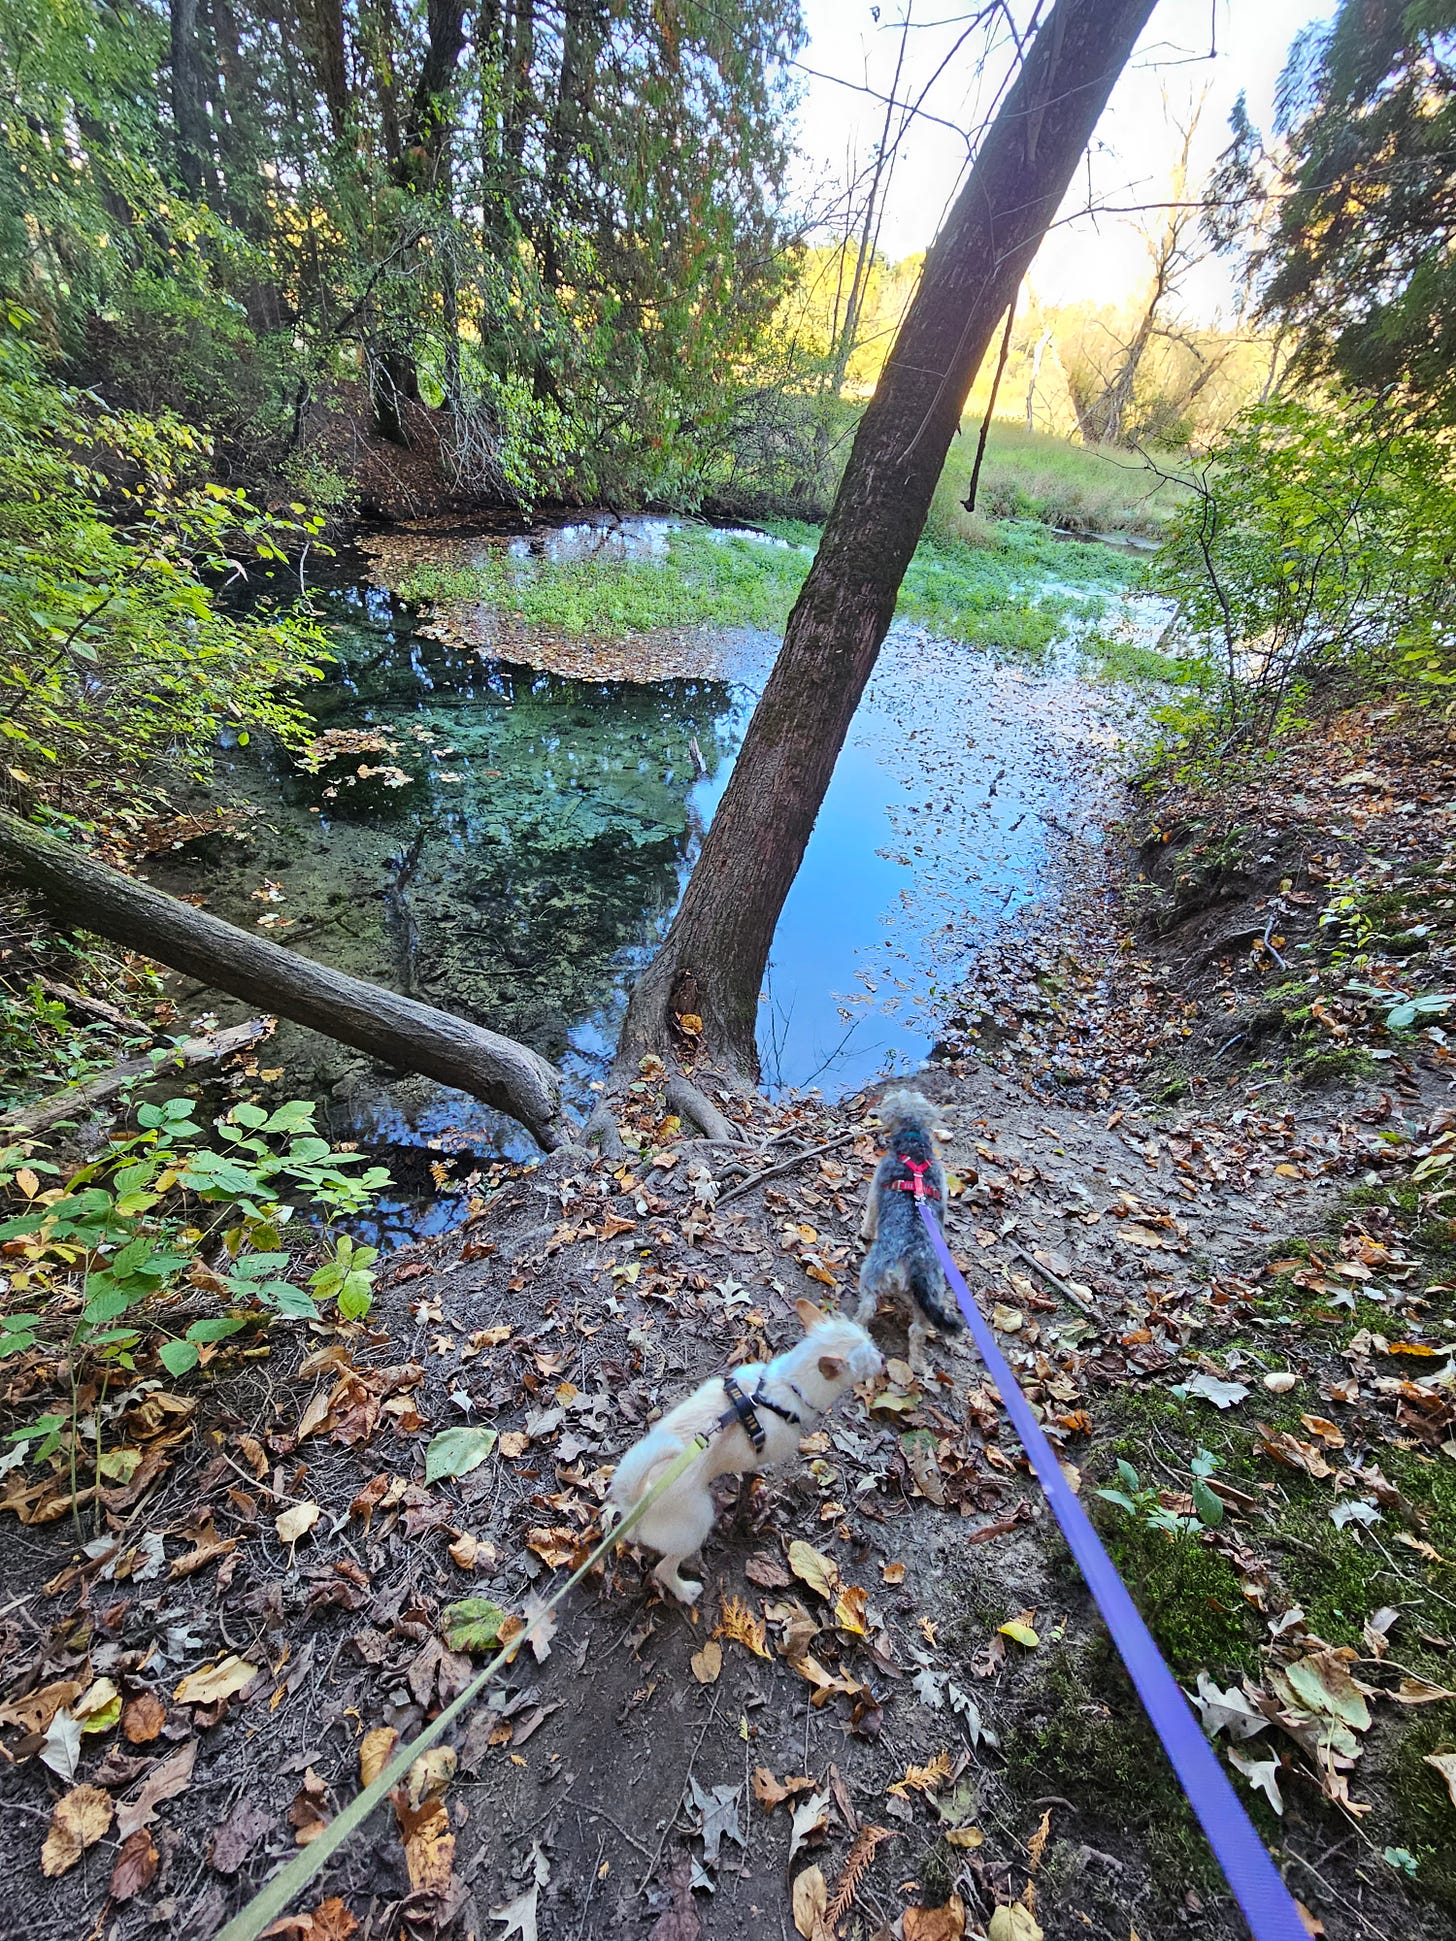 Two small dogs on leashes stand on near the edge of the steep bank overlooking clear blue waters of a spring. Some fall leaves are floating on the water.